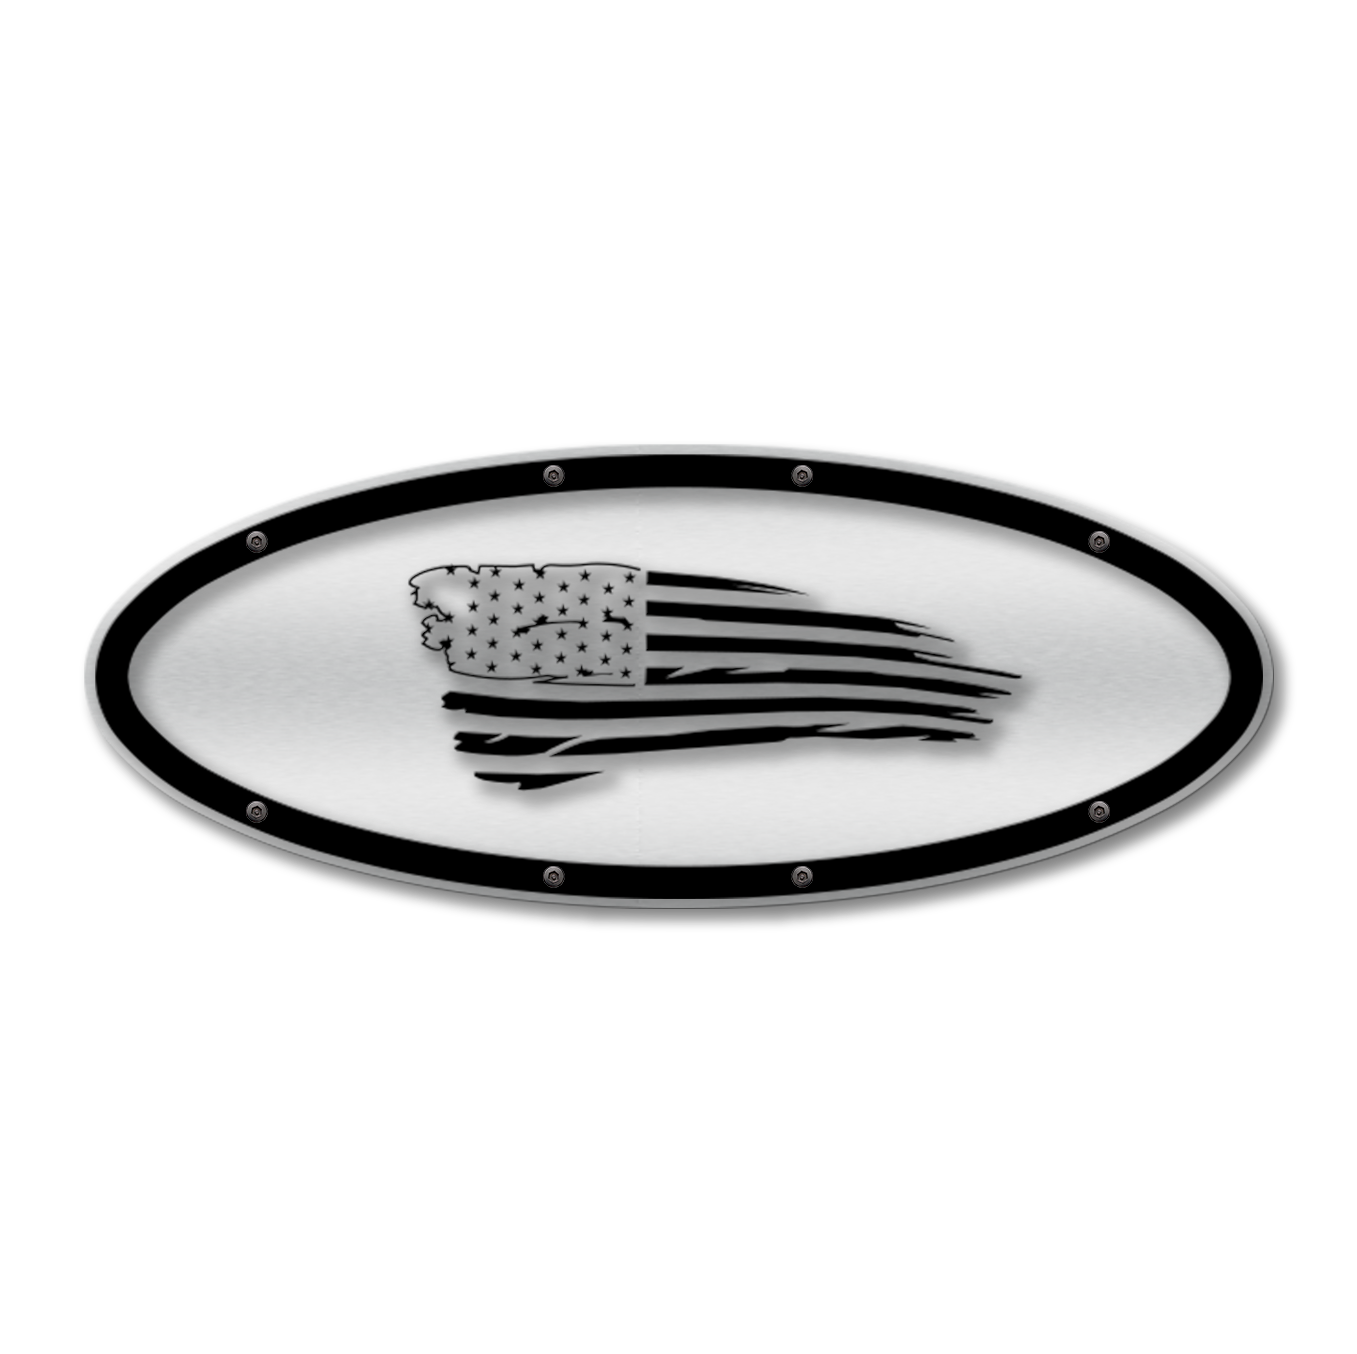 Tattered Flag Oval Replacement - Fits Multiple Ford® Trucks - Fully Customizable Colors